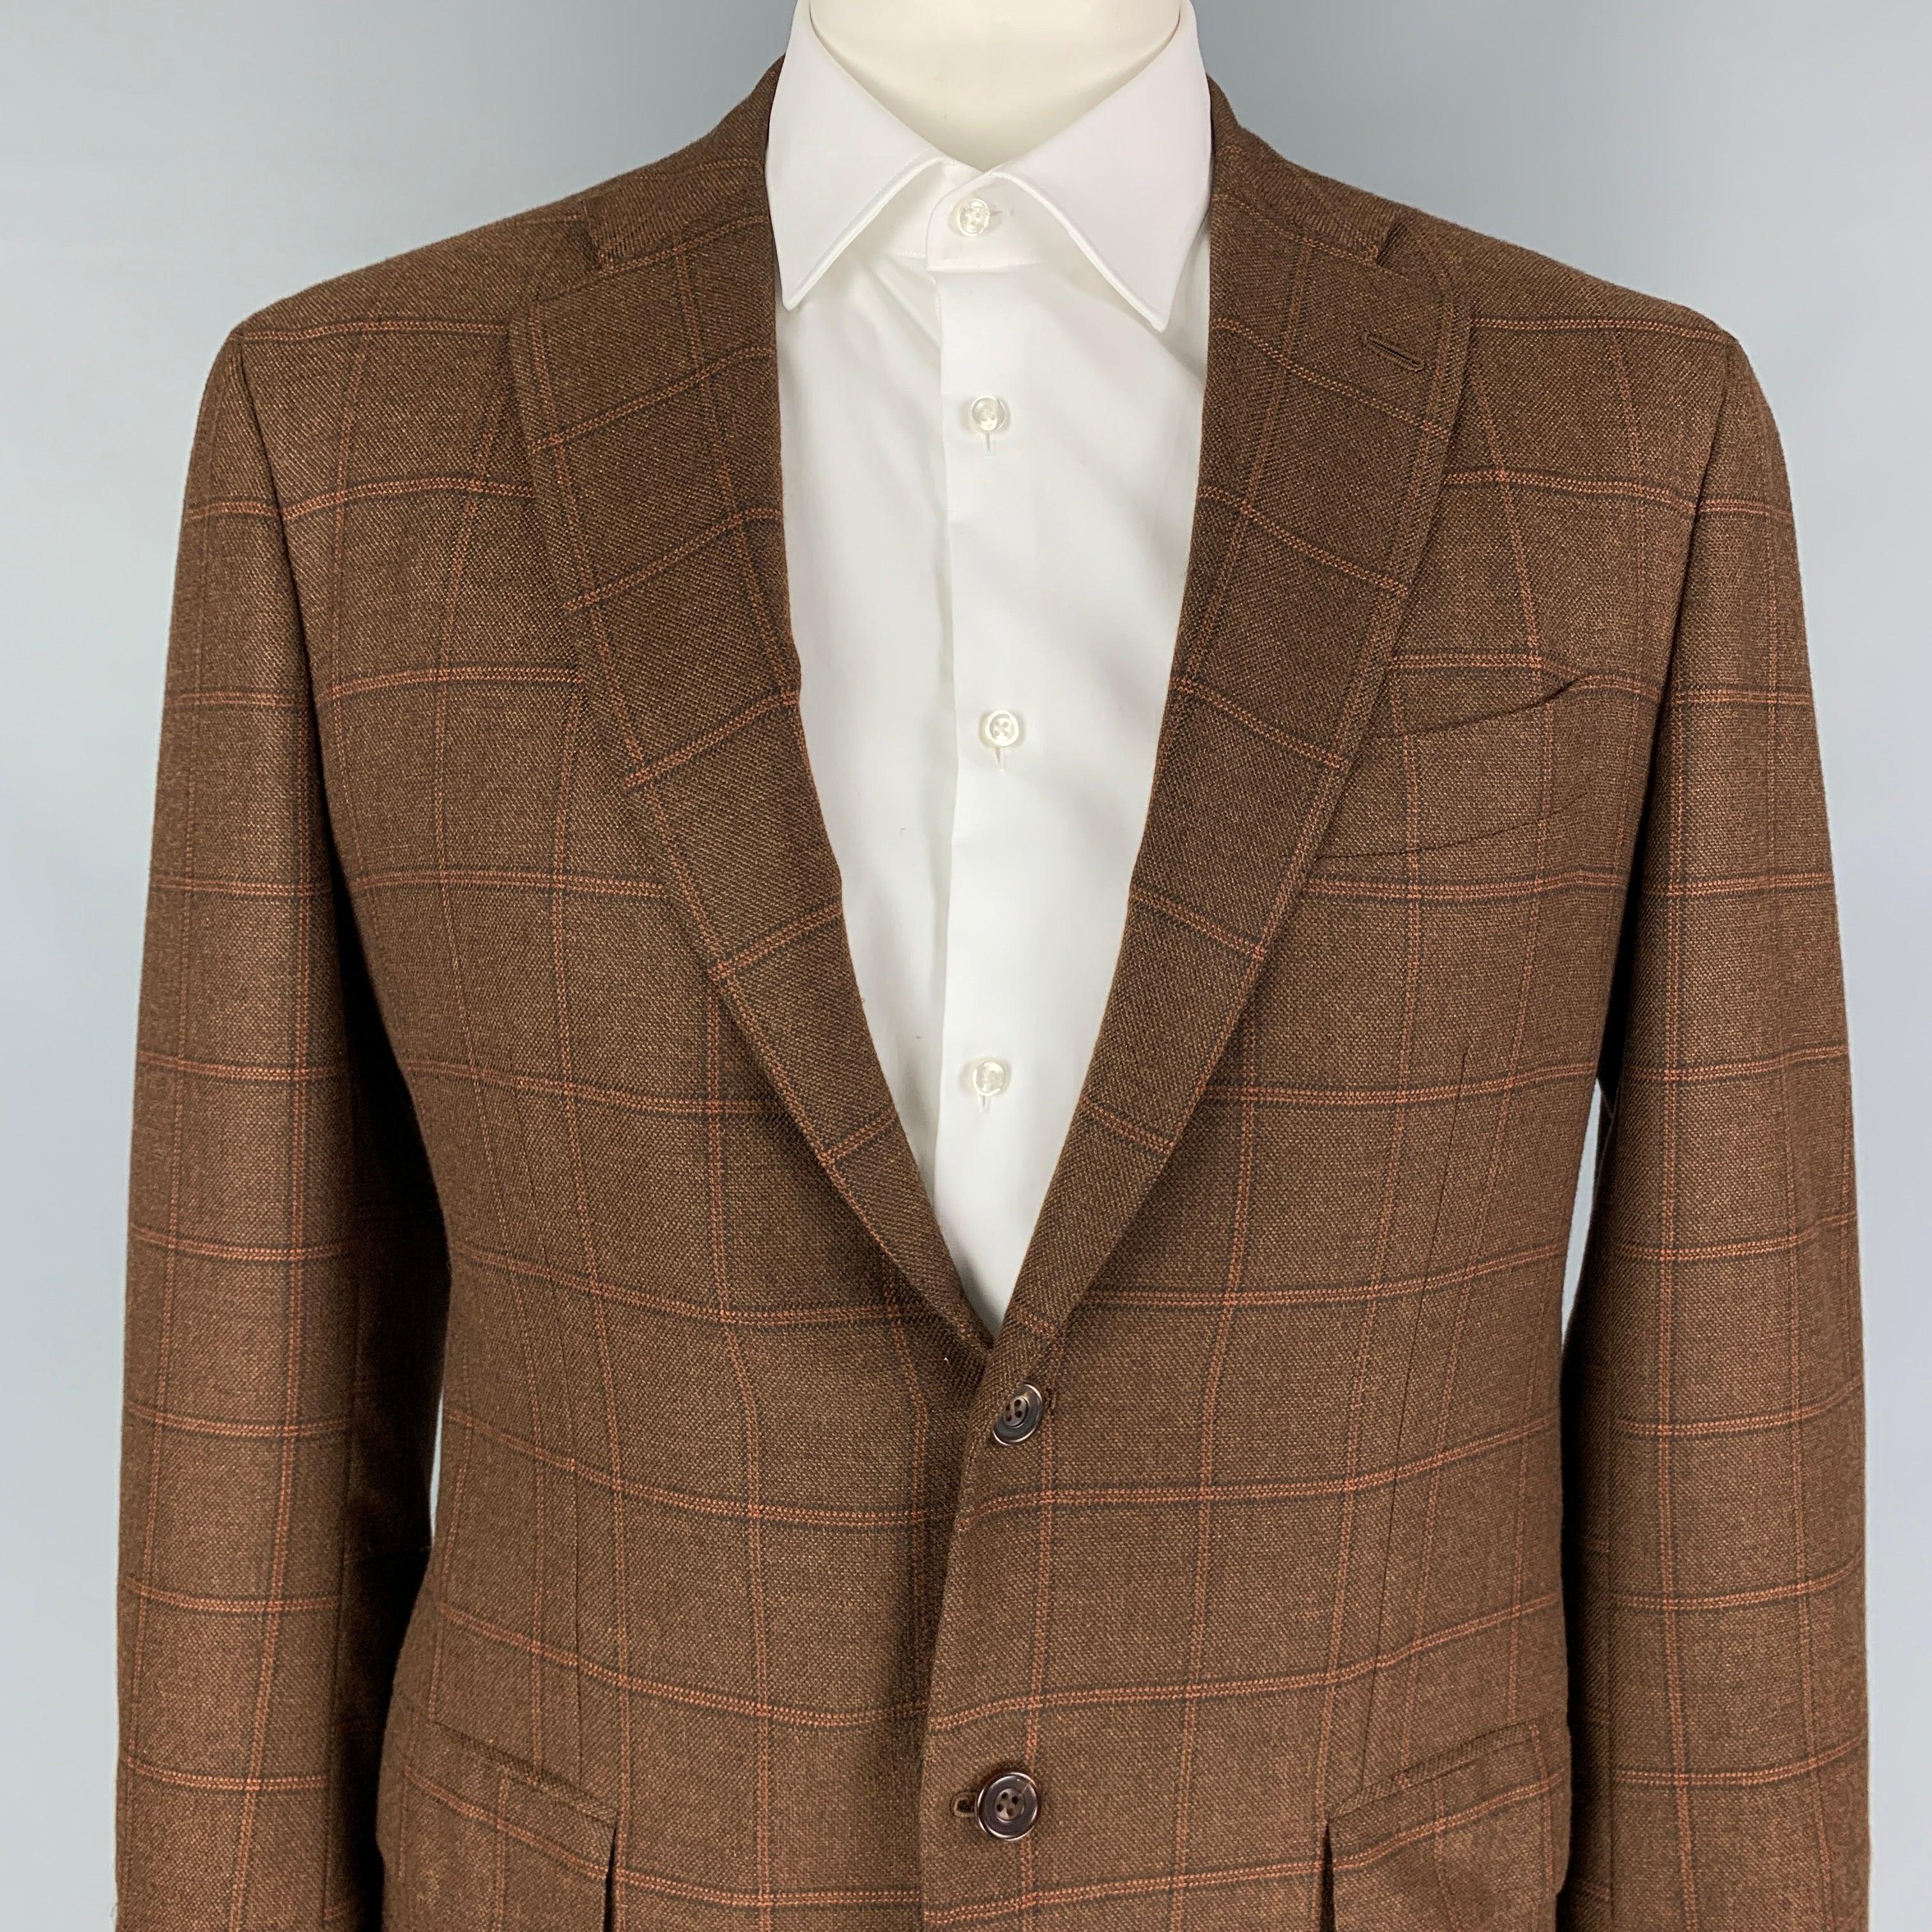 KITON sport coat comes in a brown & orange window pane cashmere with a full liner featuring a notch lapel, flap pockets, double back vent, and a double button closure. Made in Italy.
 Excellent
 Pre-Owned Condition. 
 

 Marked:  54 
 

